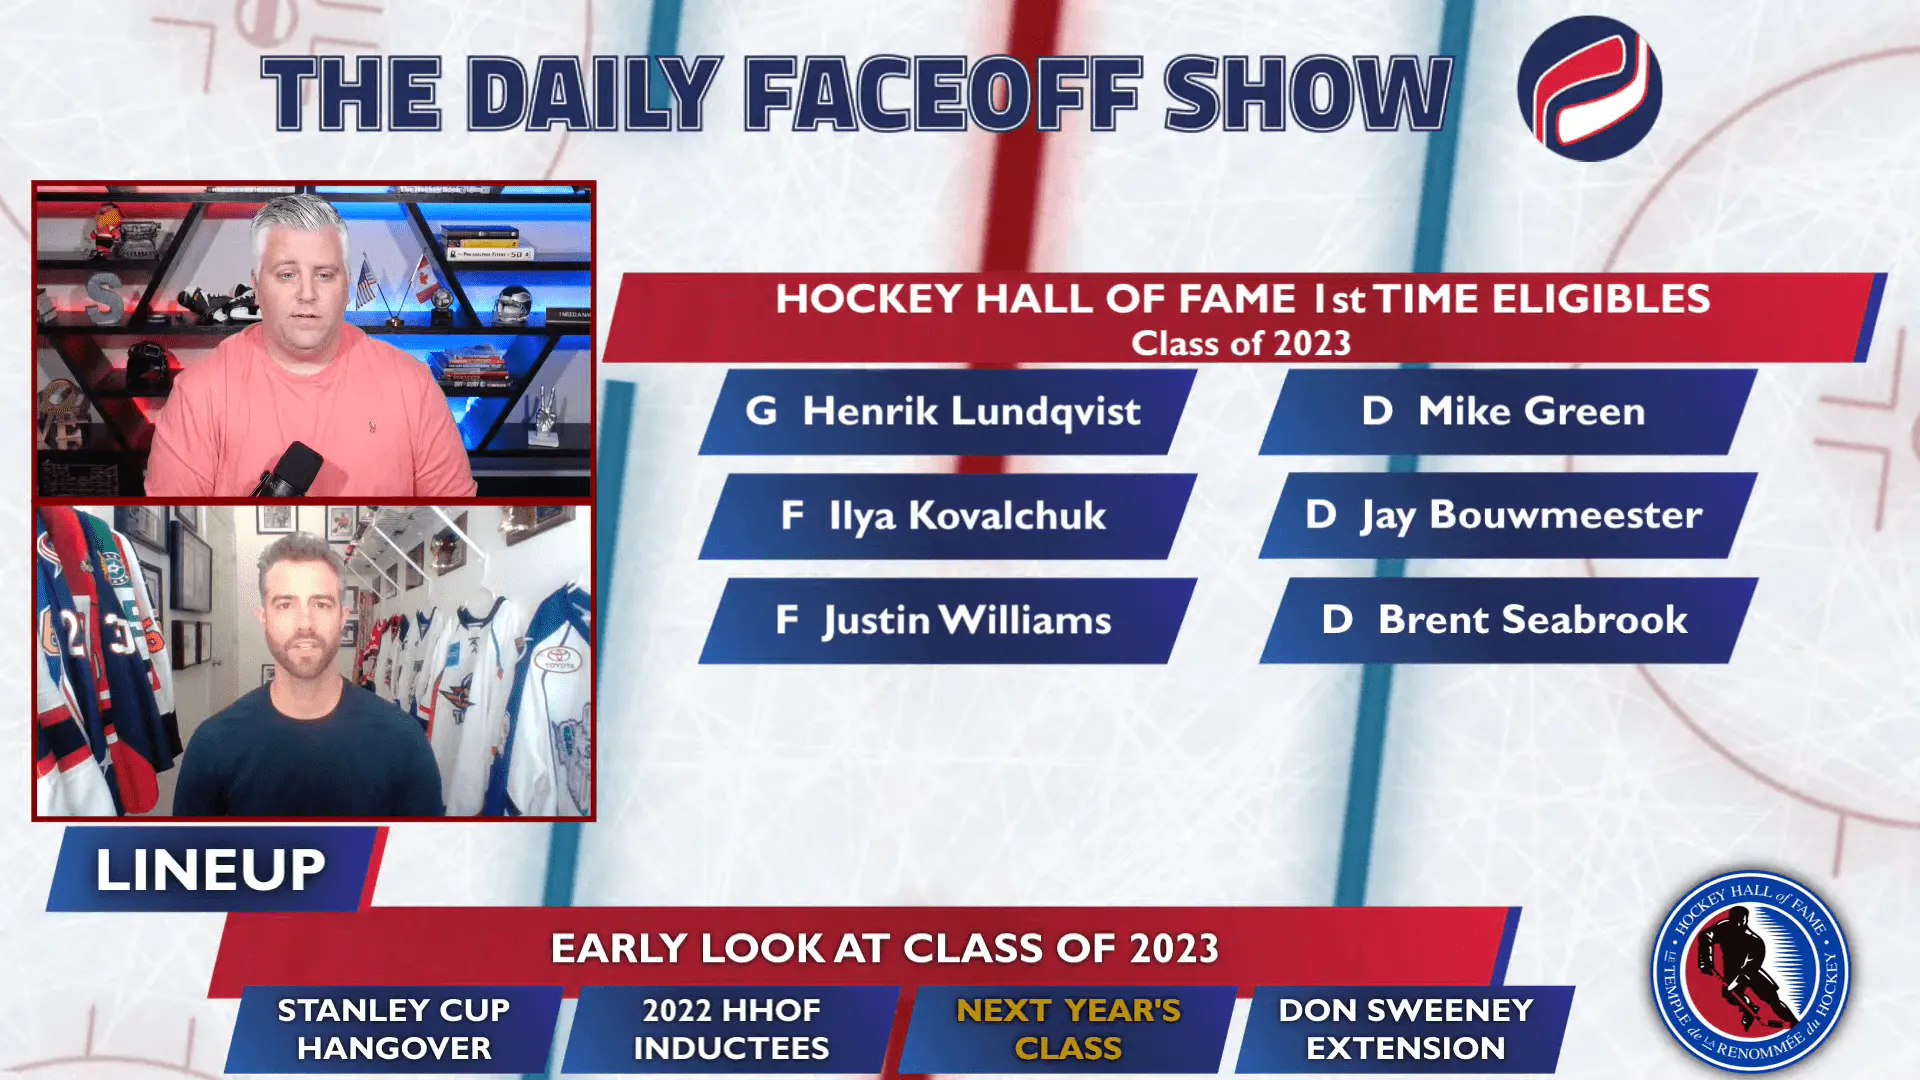 The Daily Faceoff Show: Henrik Lundqvist is a first ballot lock for 2023’s Hall of Fame class. Who else is?